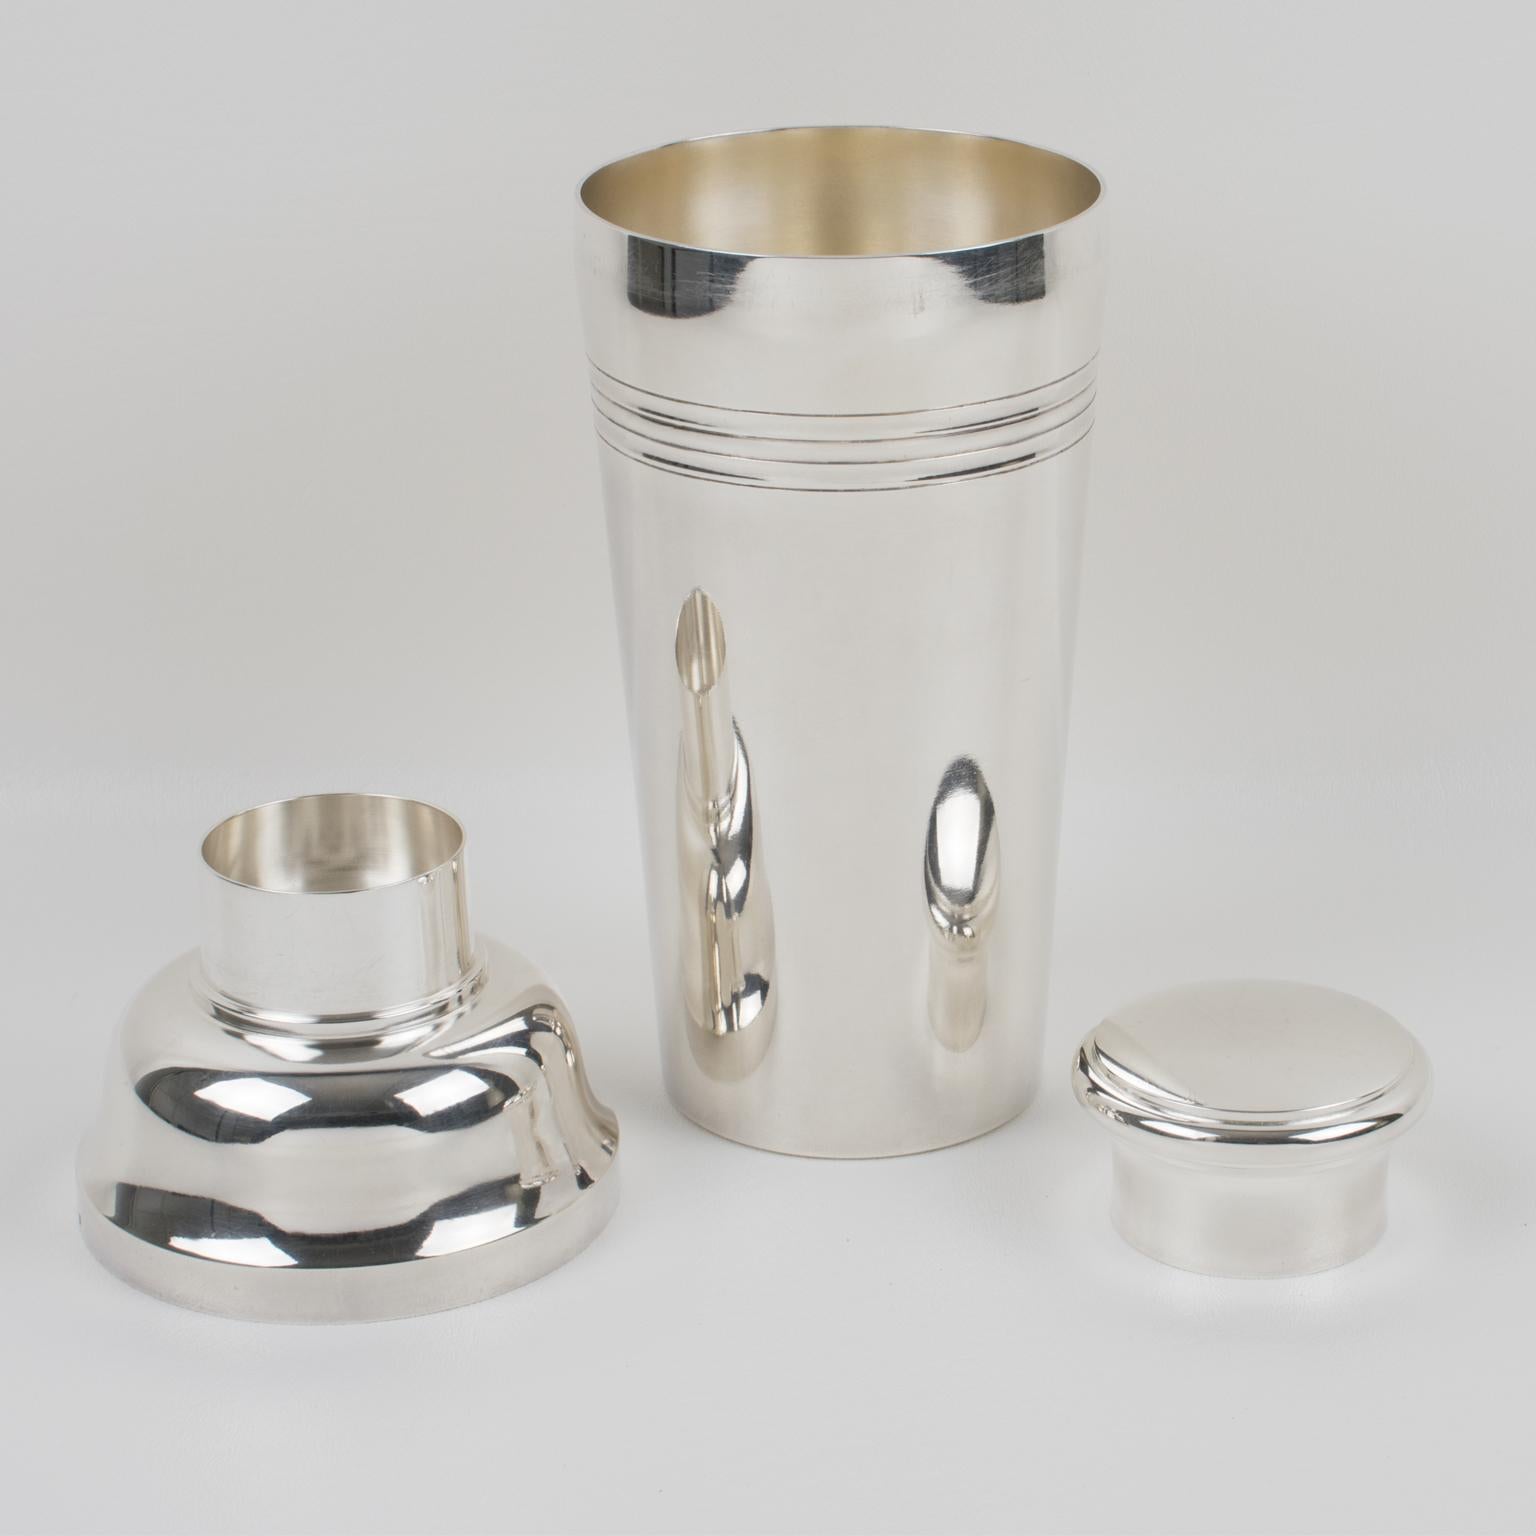 Elegant French Art Deco silver plate cylindrical cocktail or Martini shaker by silversmith Ste S. & Cie, Paris. Three sectioned designed cocktail shaker with removable cap and strainer. Lovely Art Deco flair with geometric design. Marked underside